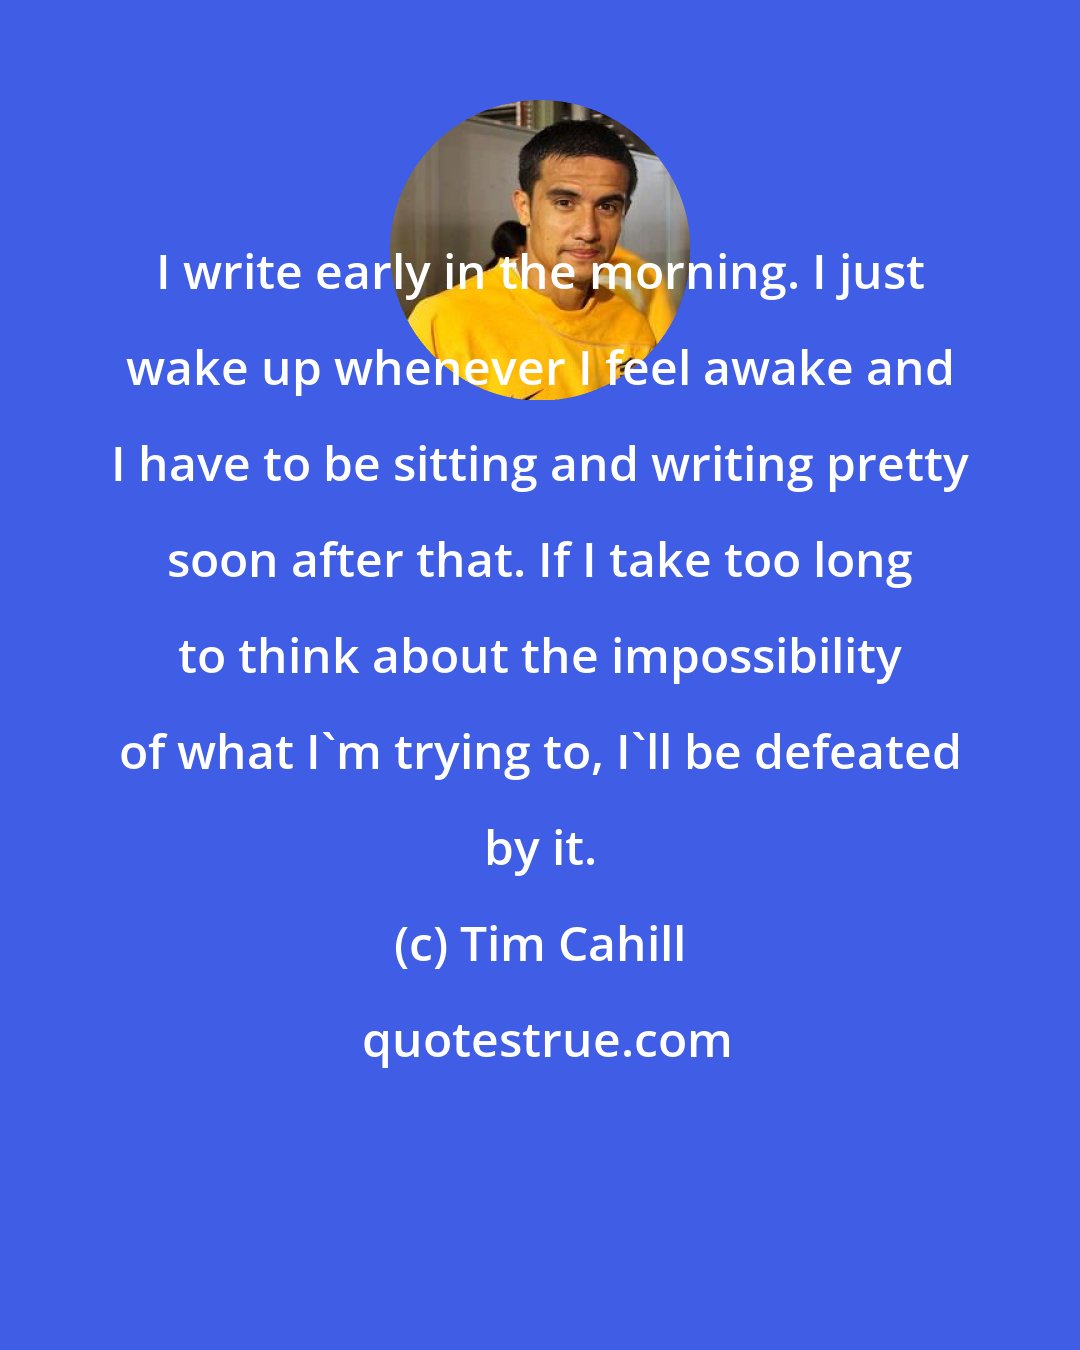 Tim Cahill: I write early in the morning. I just wake up whenever I feel awake and I have to be sitting and writing pretty soon after that. If I take too long to think about the impossibility of what I'm trying to, I'll be defeated by it.